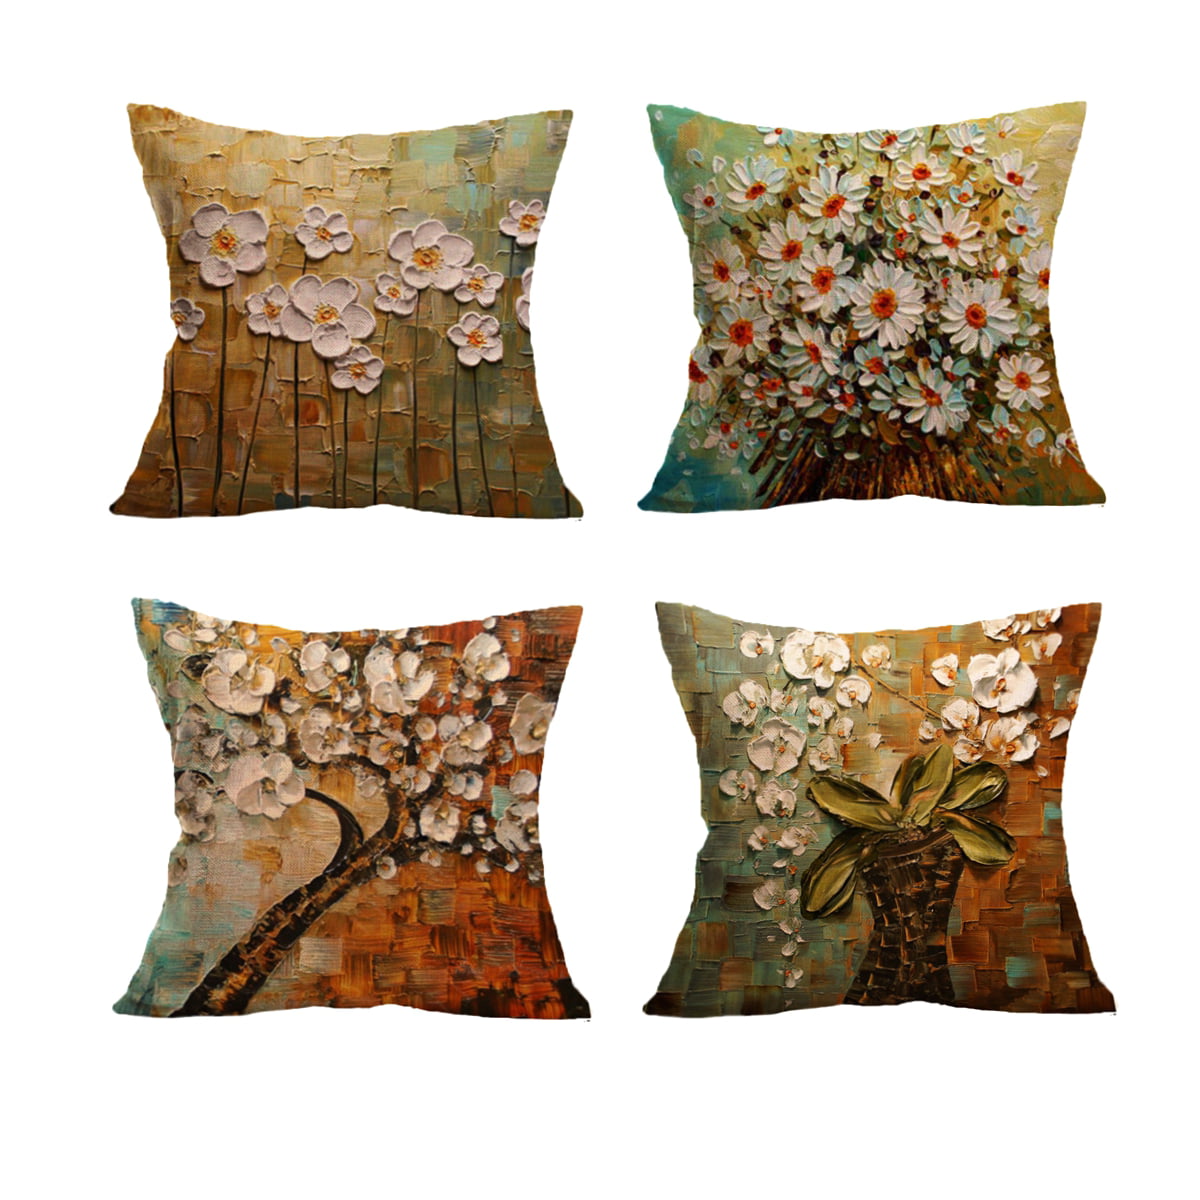 Flower Decorative Throw Pillow Case Cushion Covers 18x18 inch Linen ...